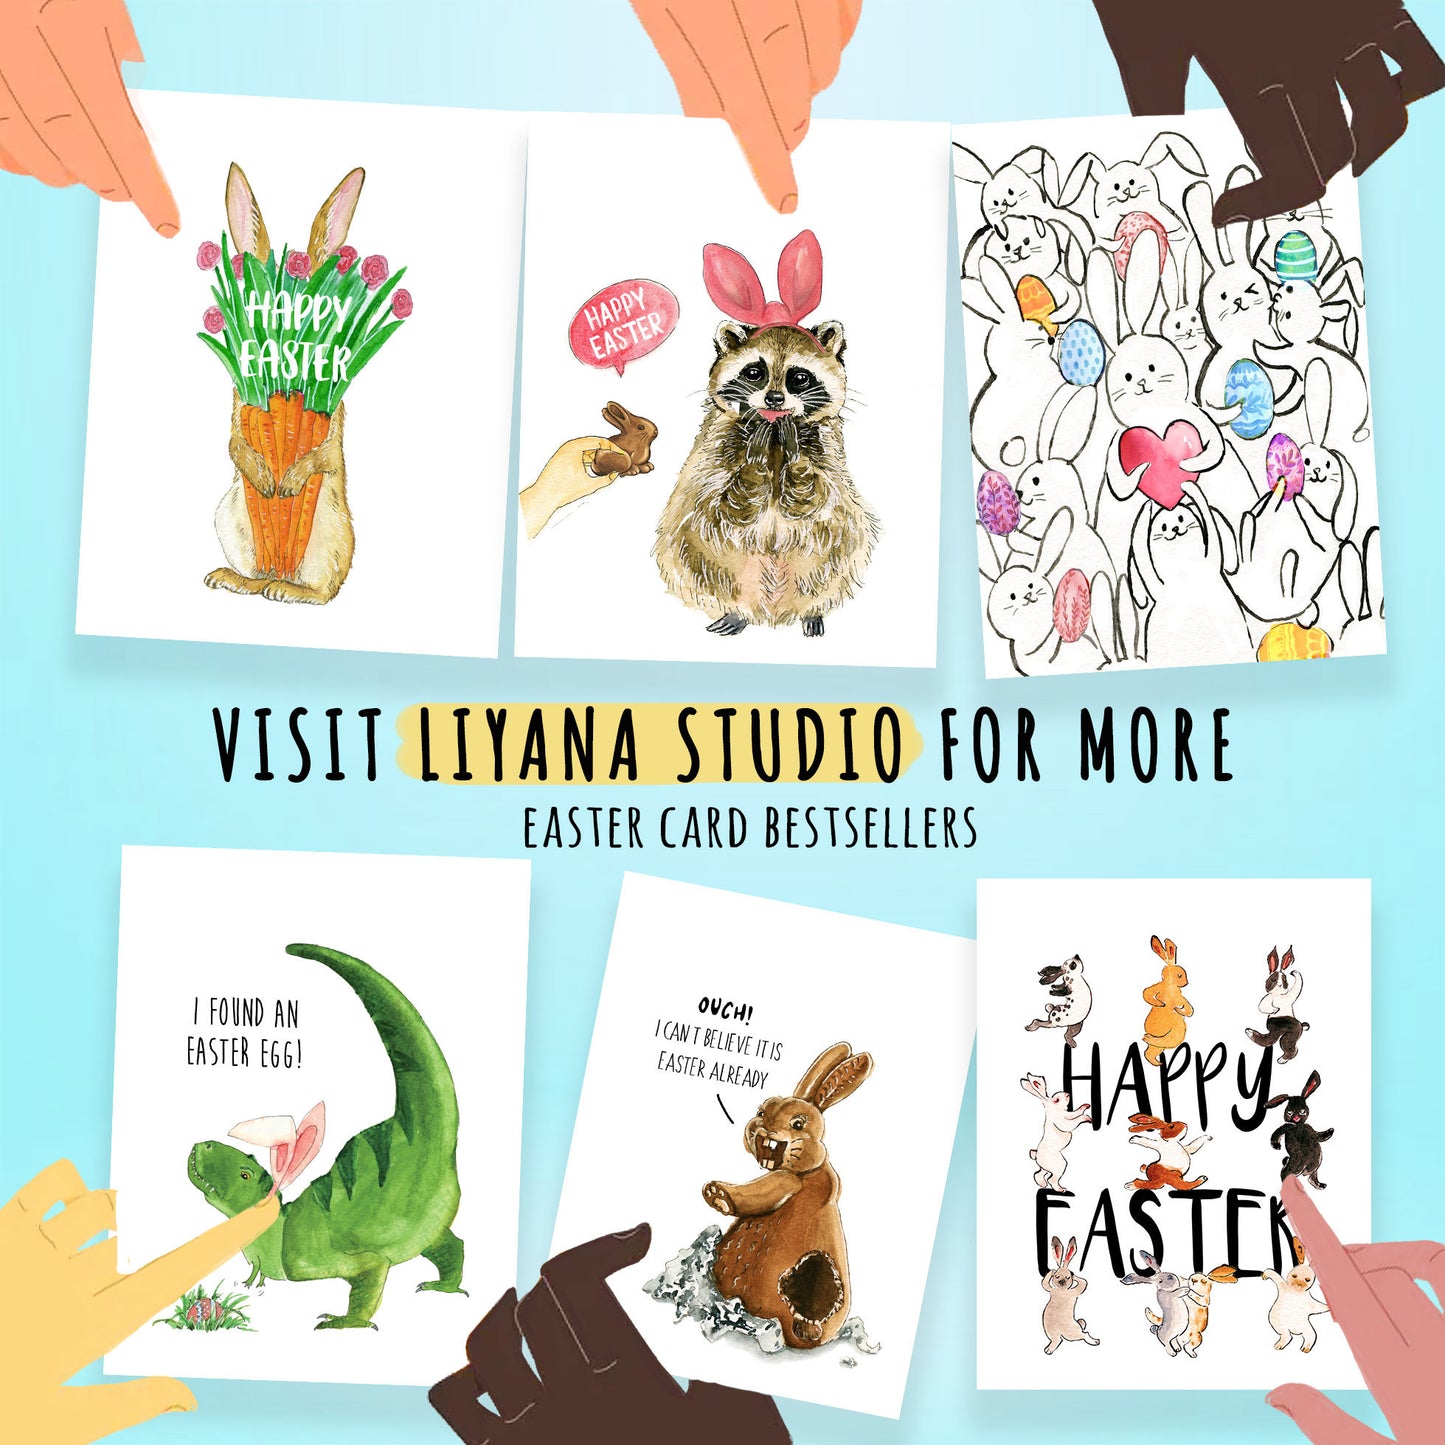 Curled Up Cat Eggs Easter Cards - Funny Easter Eggs Card For Cat Lovers - Liyana Studio Greeting Cards Handmade